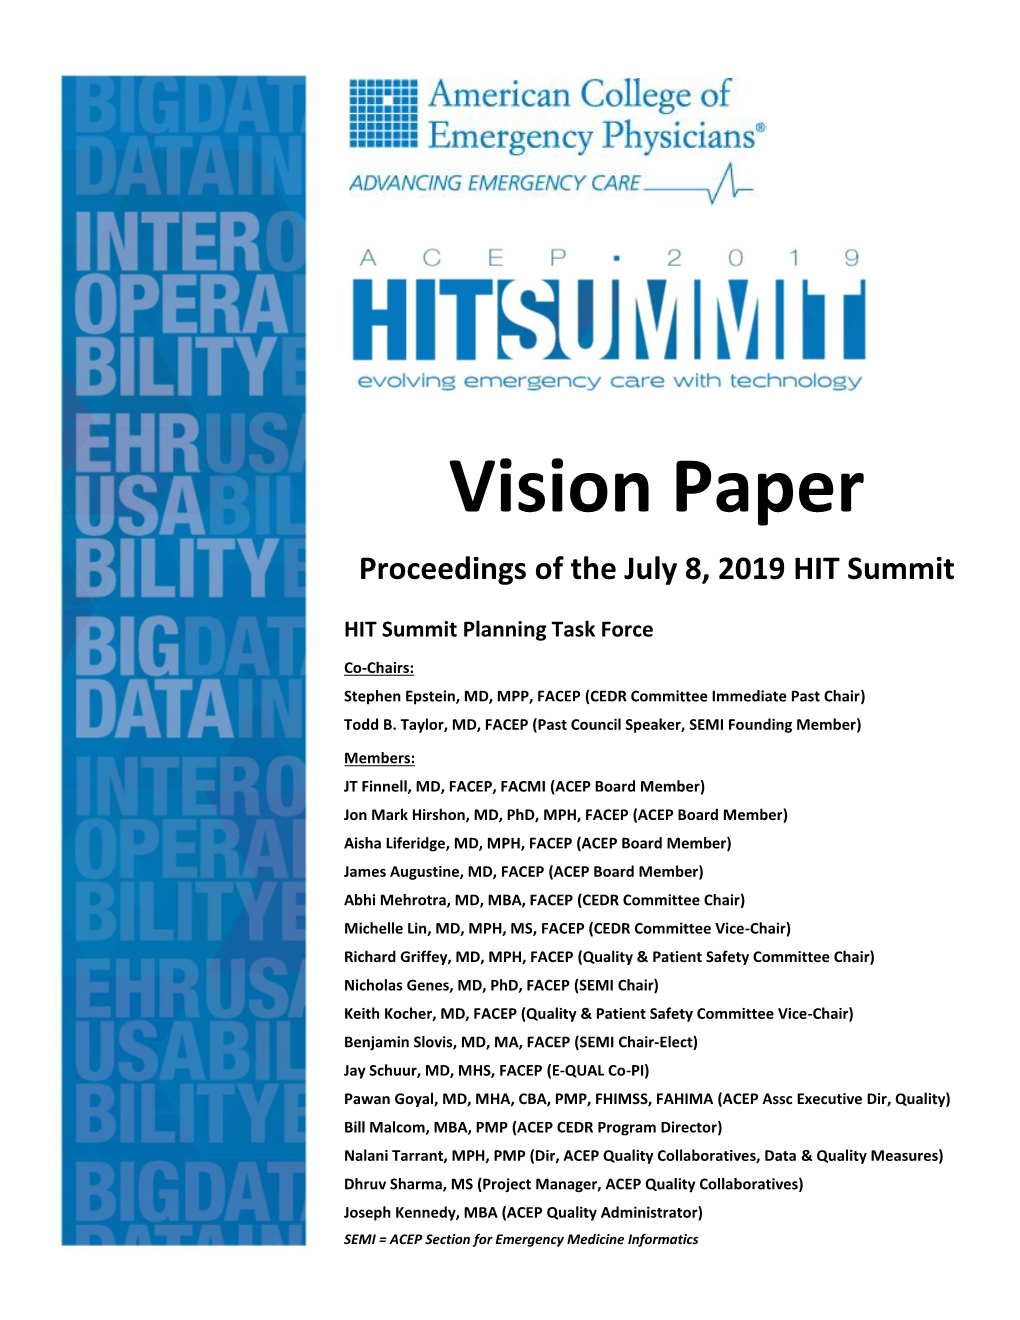 Vision Paper Proceedings of the July 8, 2019 HIT Summit